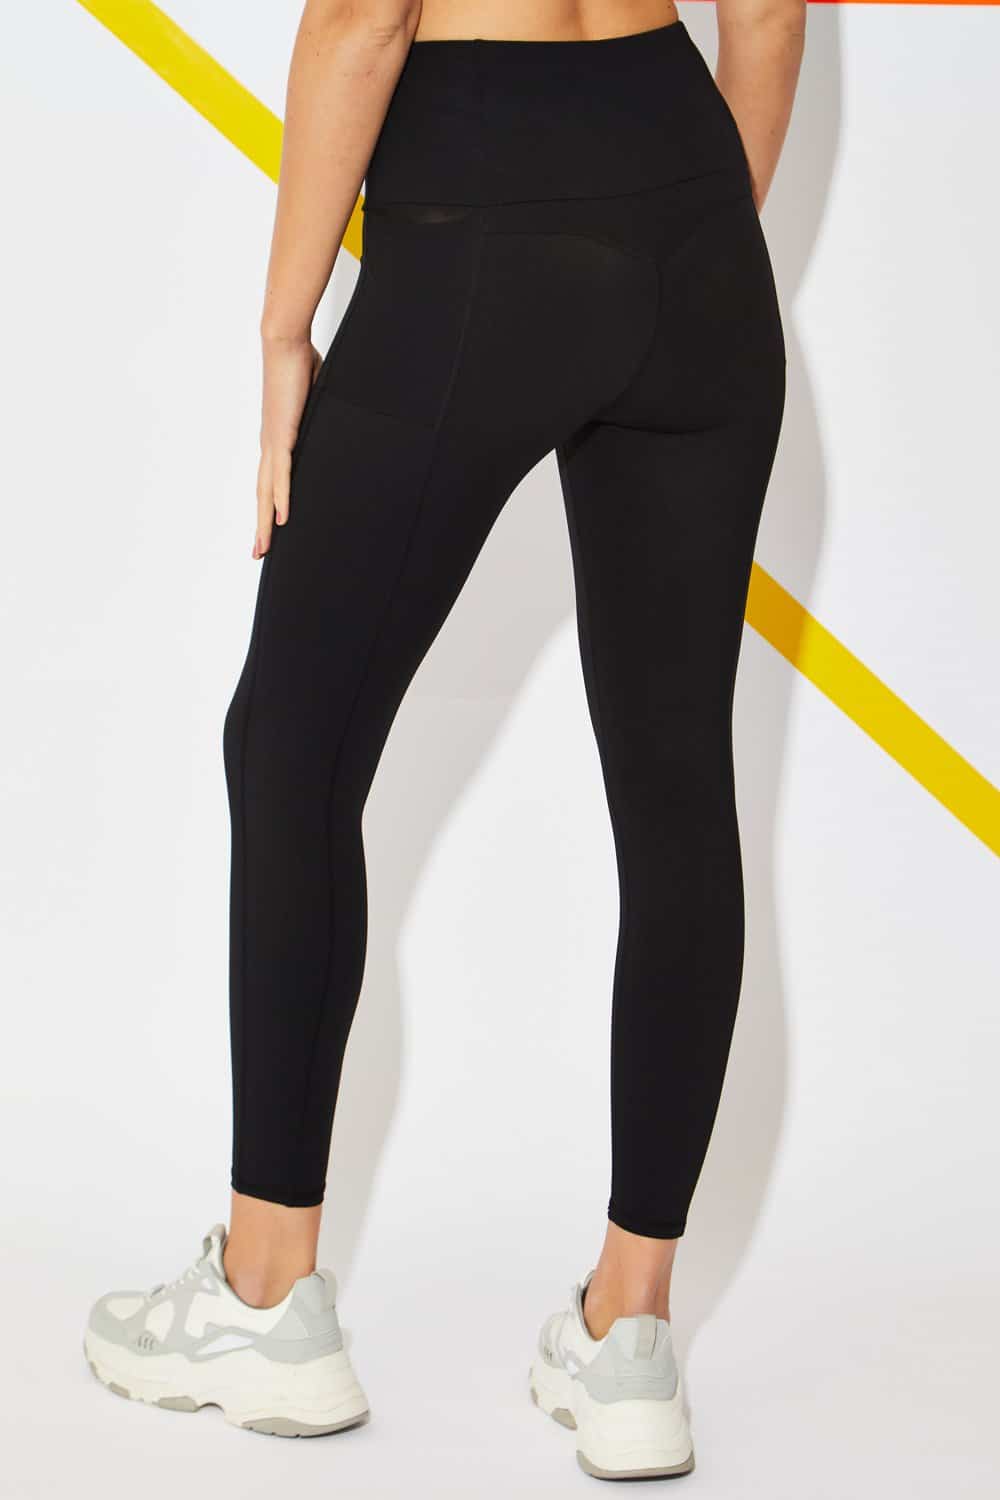 Black Workout Leggings With Pockets